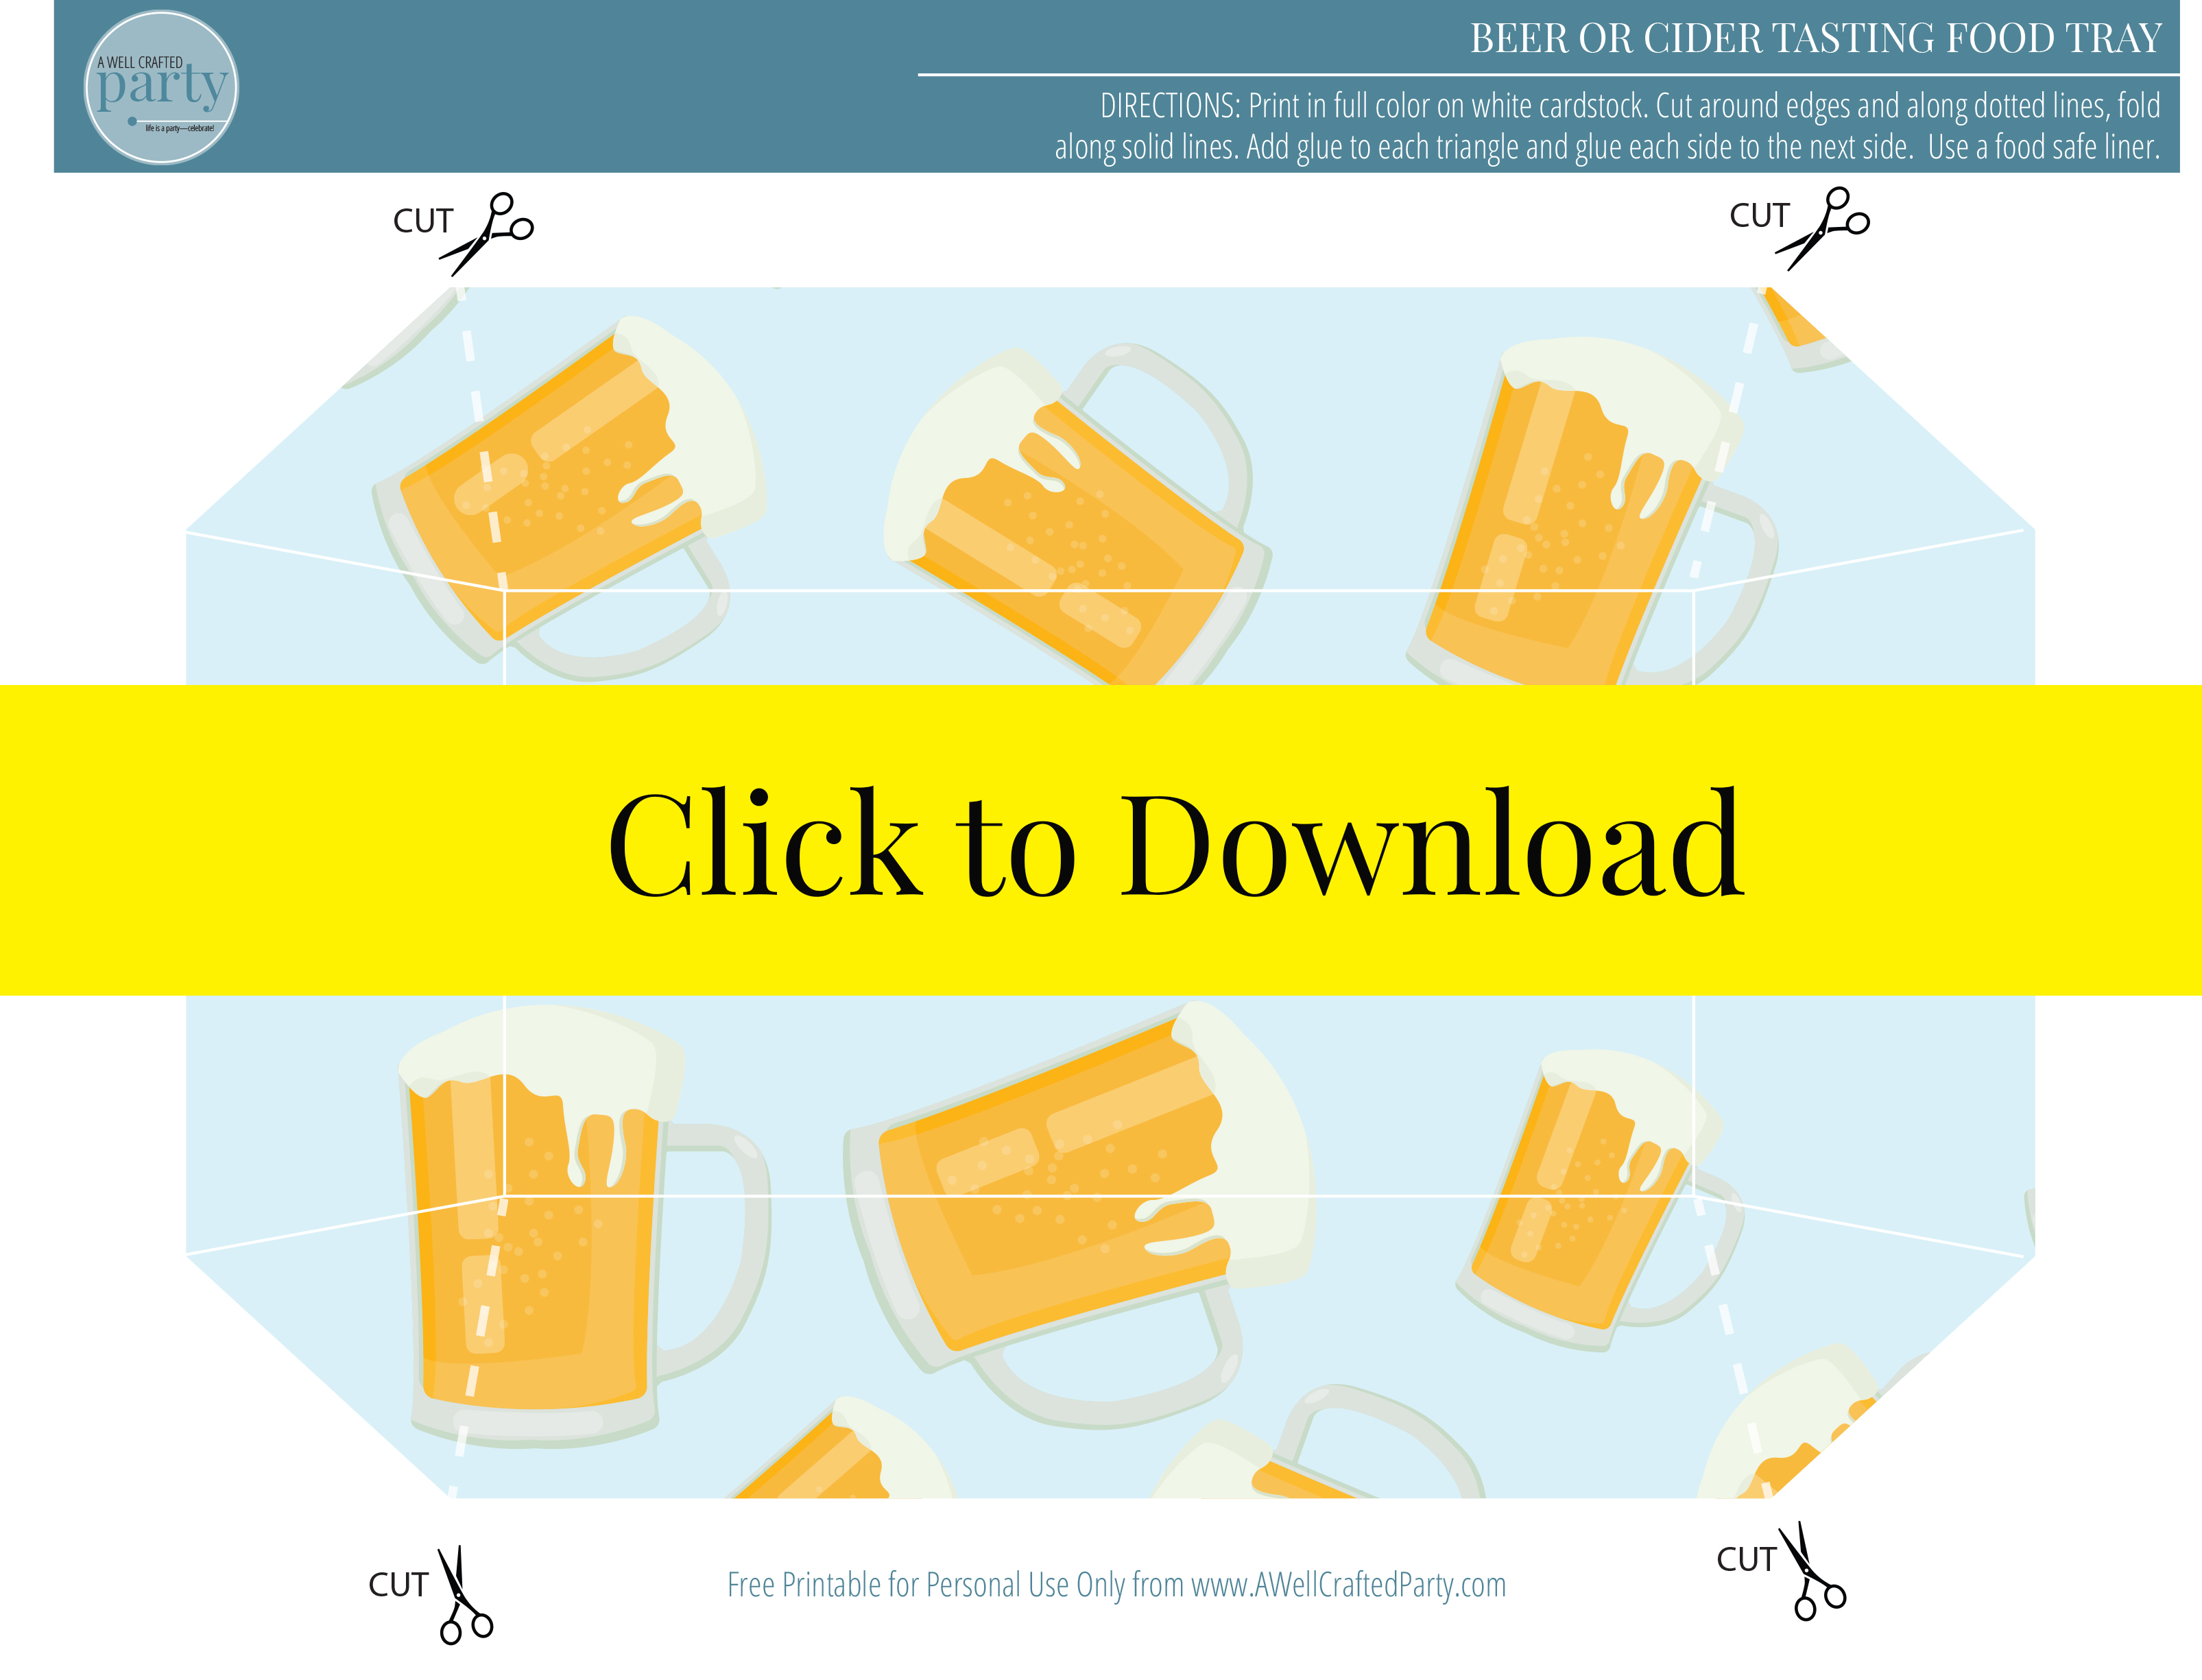 Free Beer Tasting Printable | A Well Crafted Party